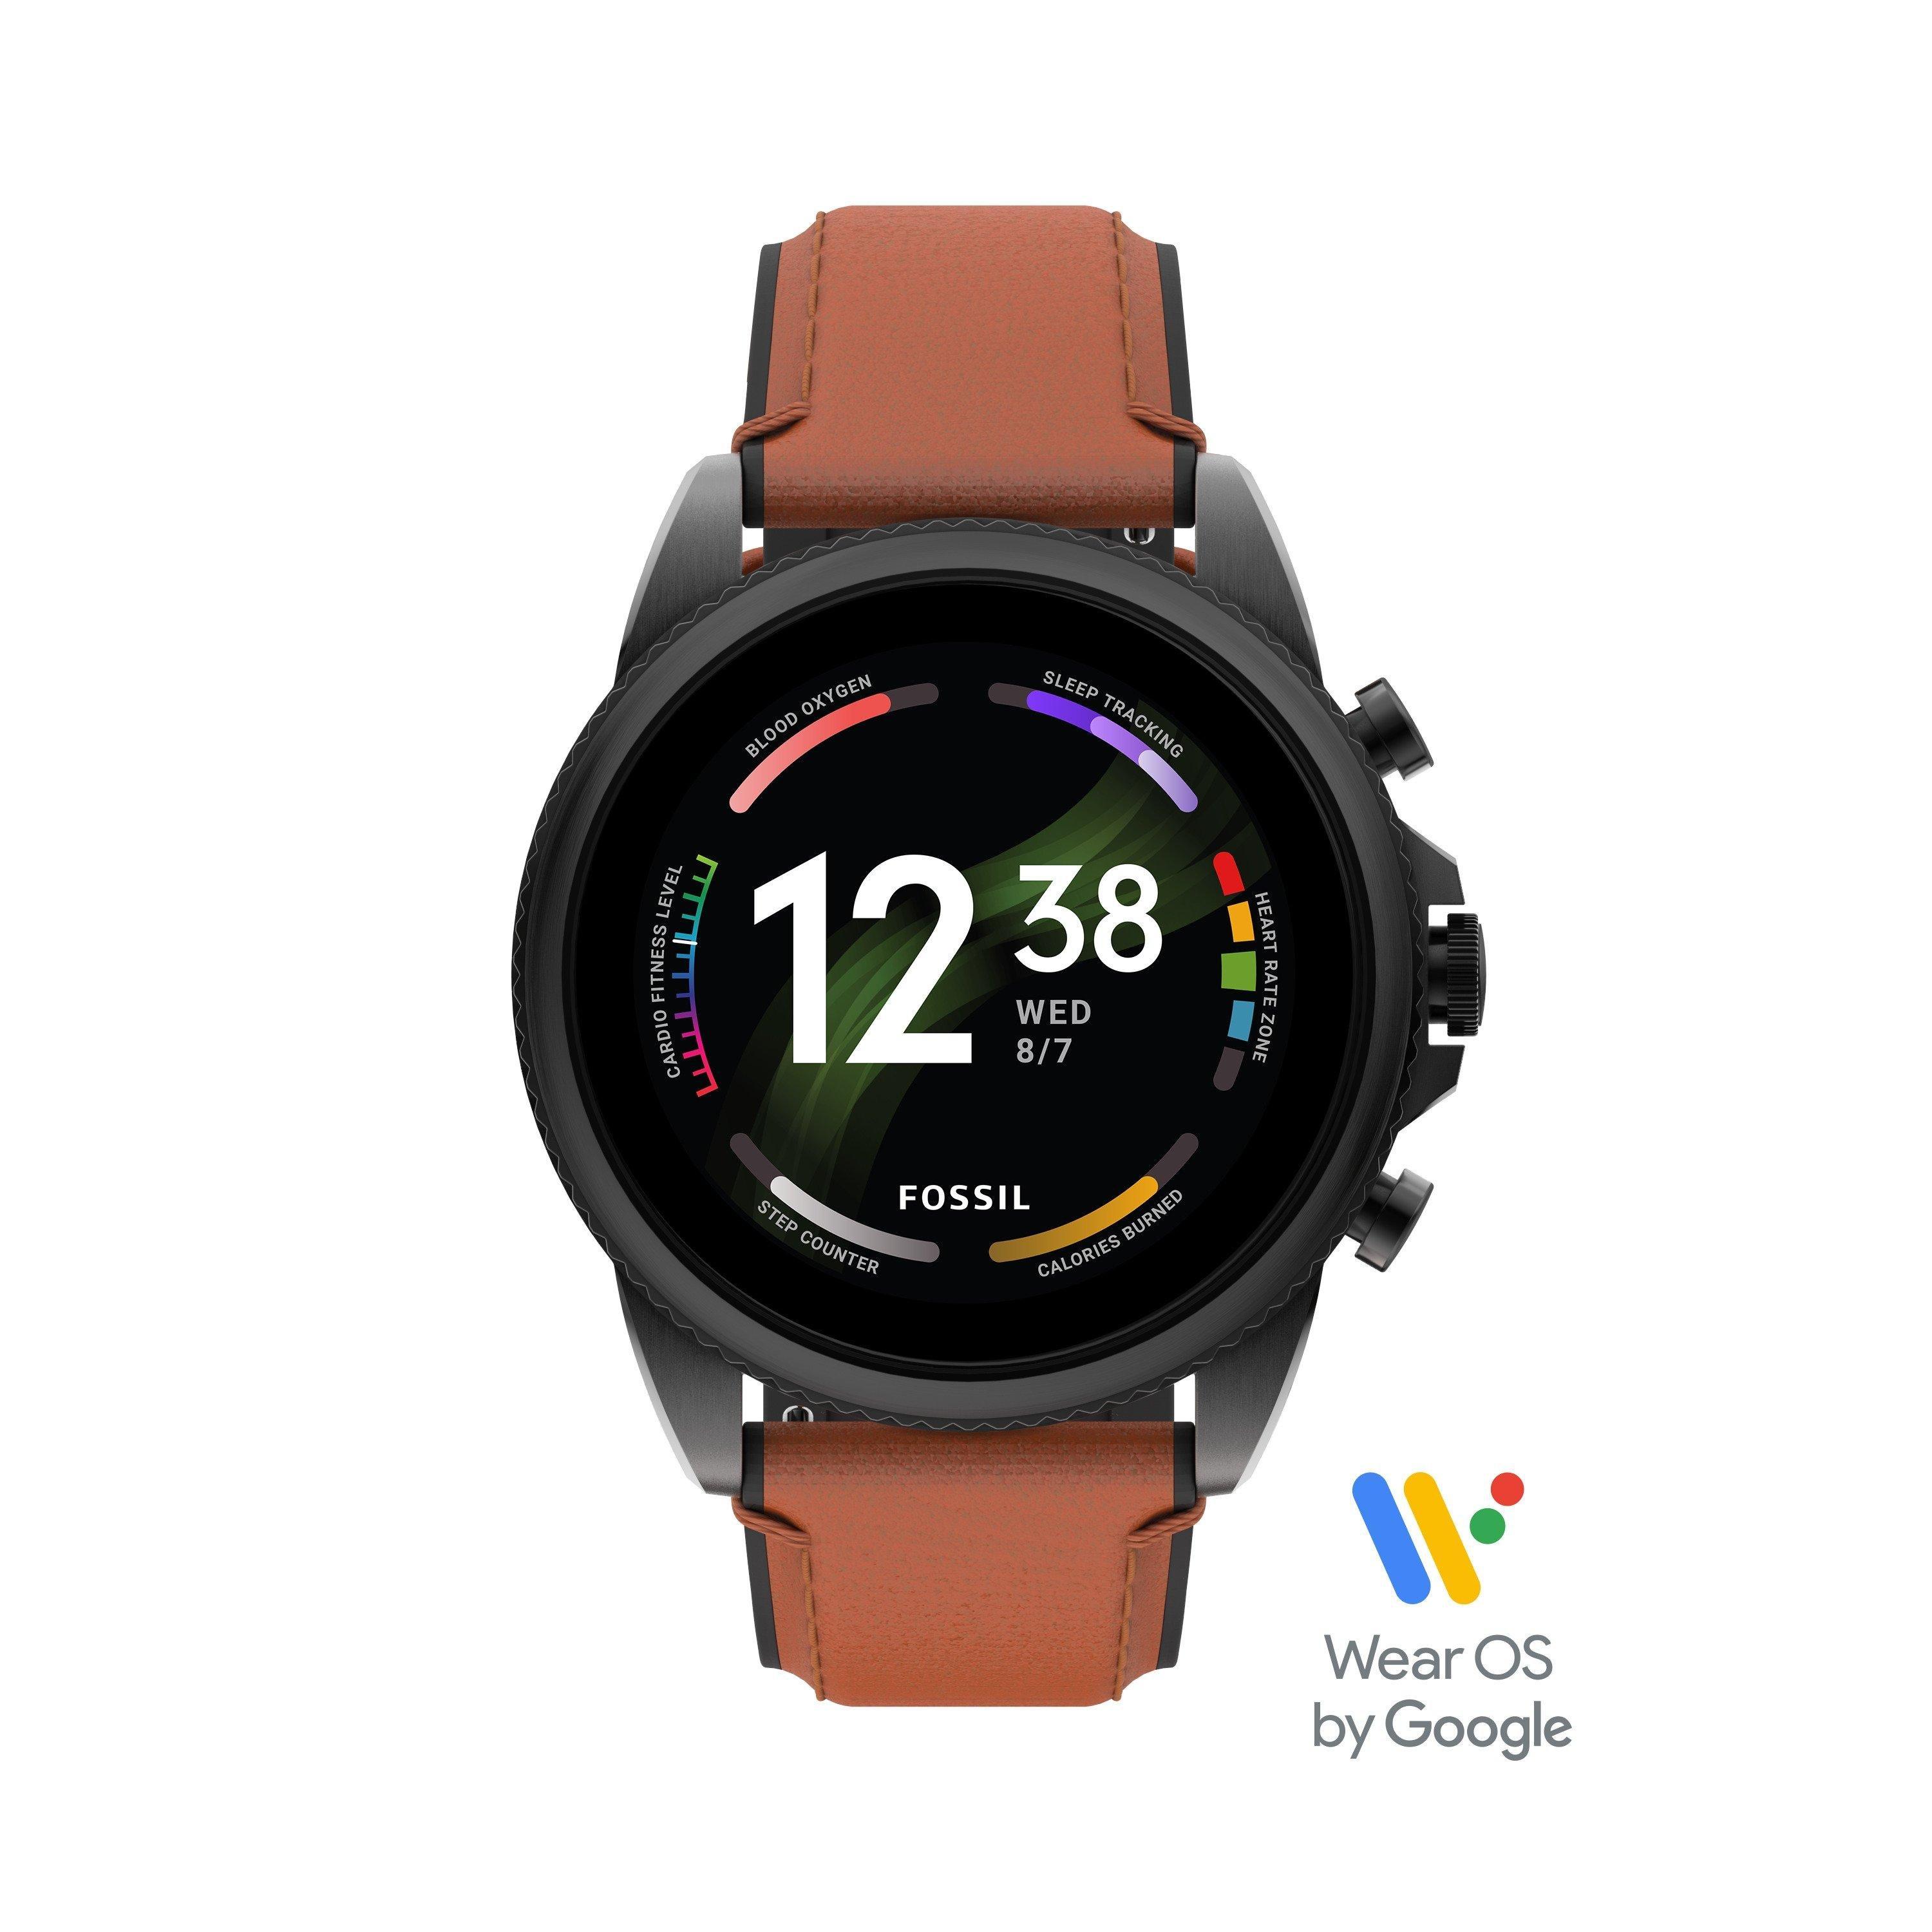 Fossil Gen 6 44mm Smartwatch with Brown Leather Strap